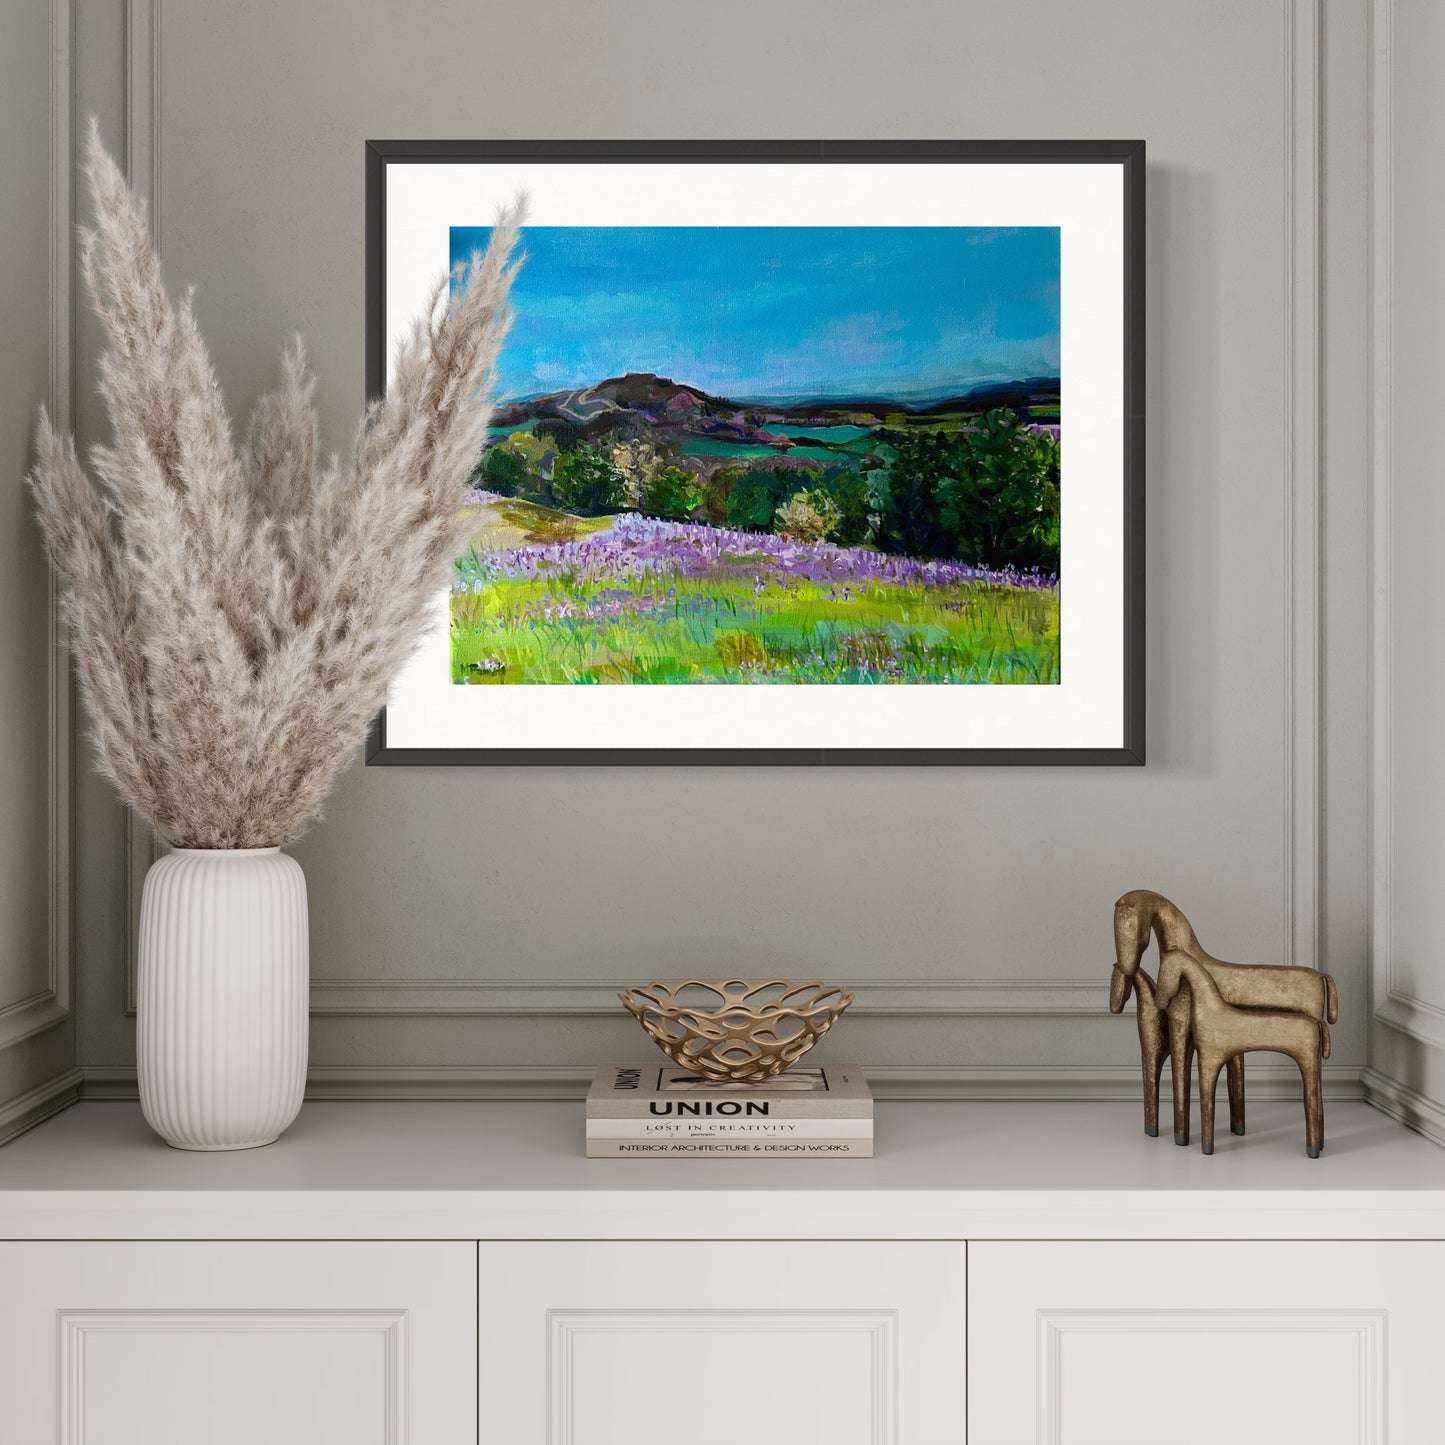 Framed print of Bluebells in the Malvern Hills from original painting by Margaret Powell. Displayed in a white alcove with white dried grass in a vase in front. 